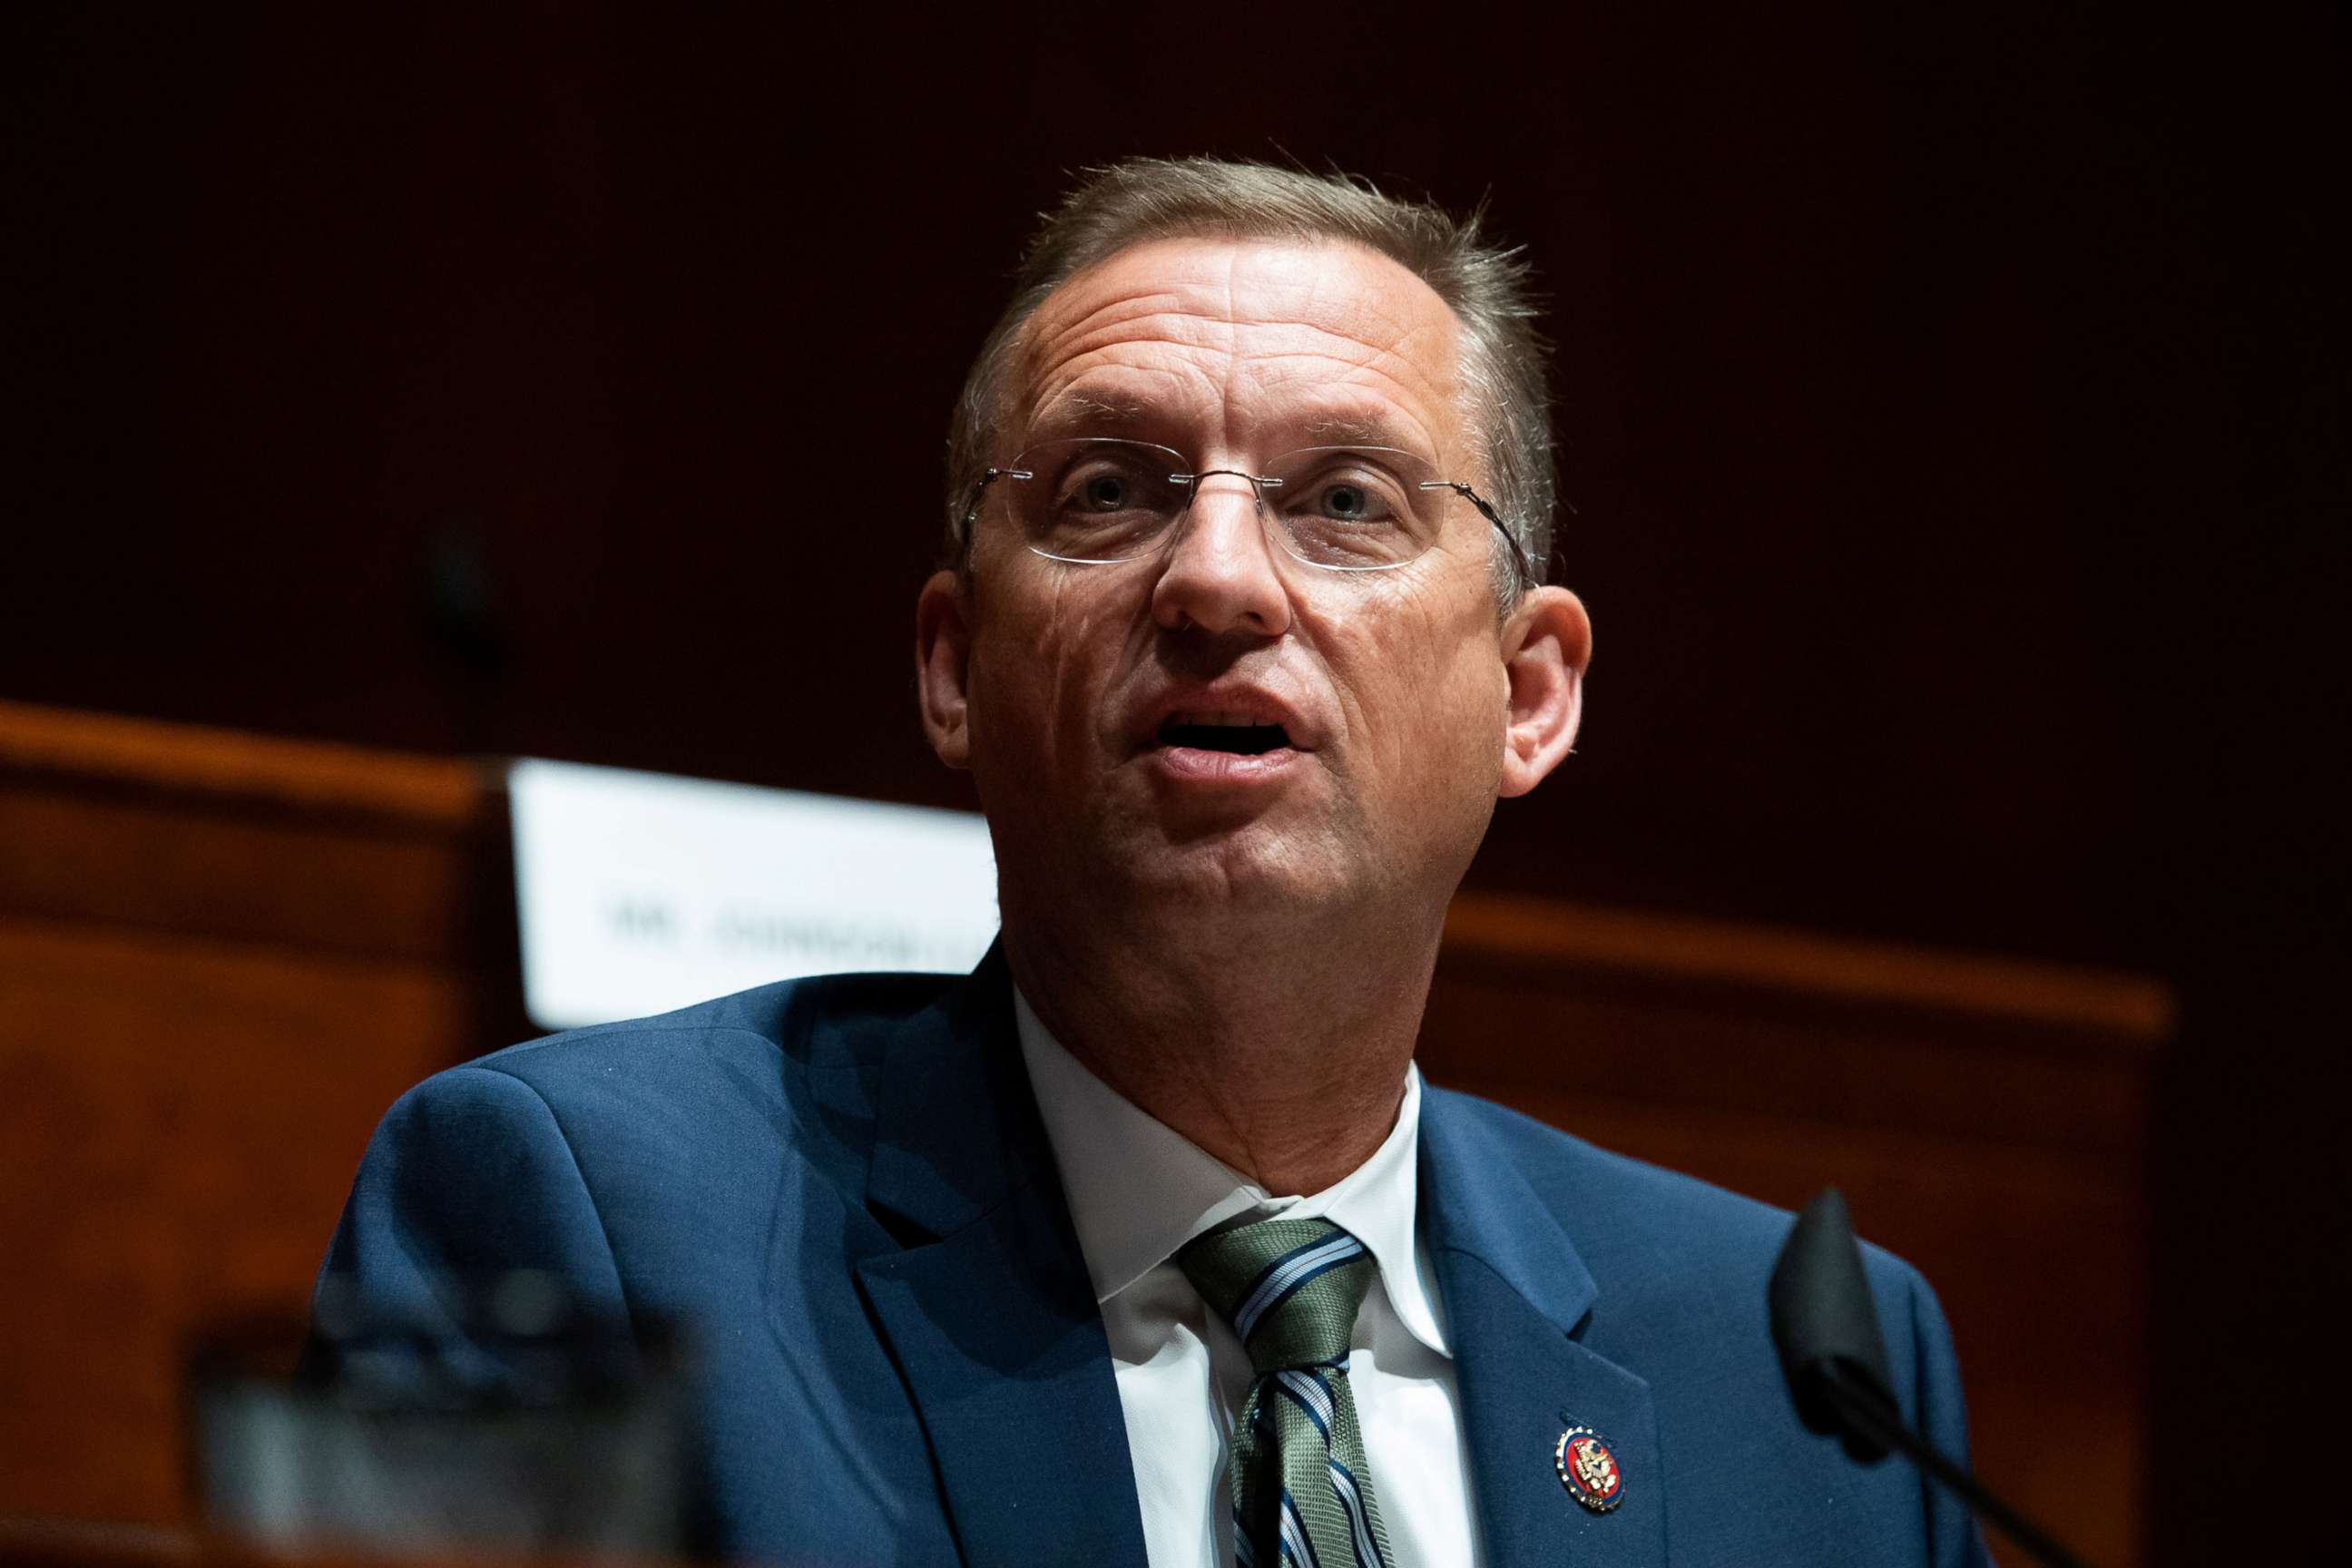 PHOTO: Rep. Doug Collins speaks during a House Judiciary Committee hearing on Capitol Hill in Washington, DC., June 10, 2020.